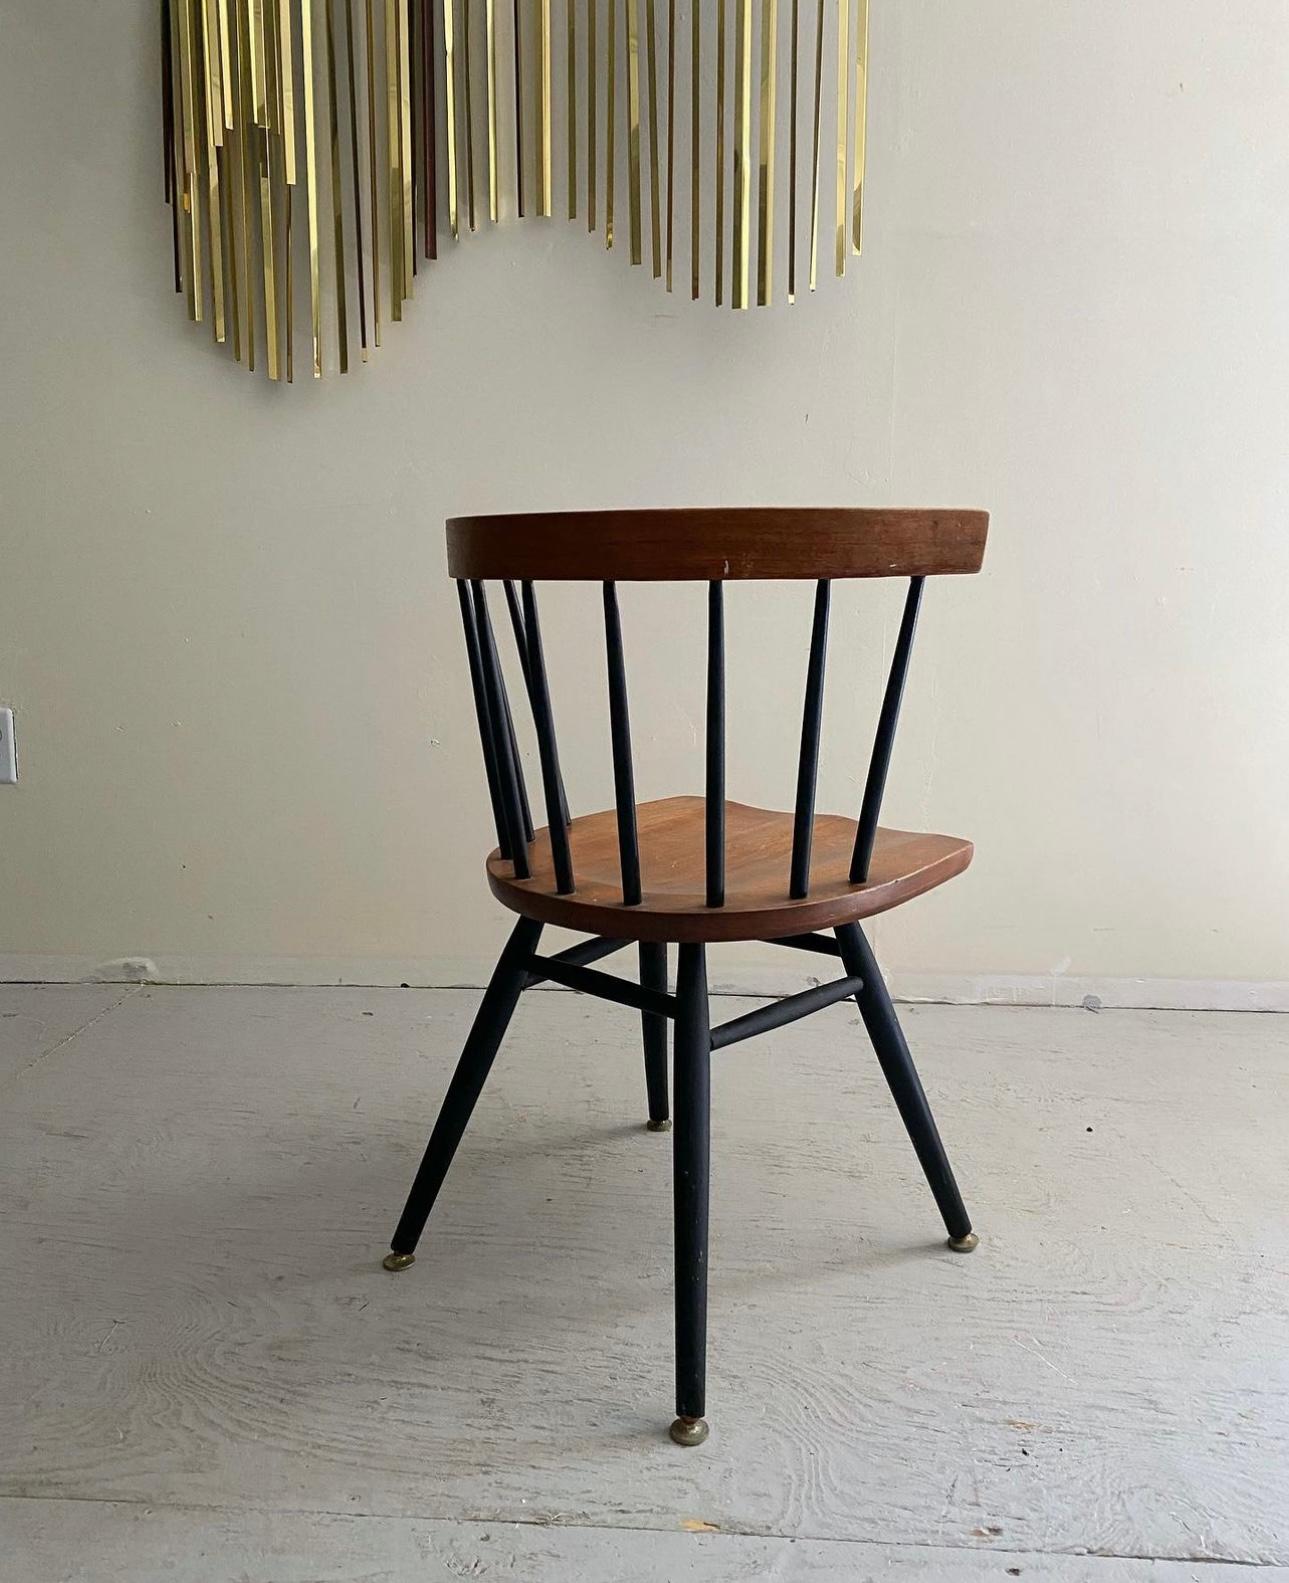 Iconic Mid-Century Modern Spindle Back “N19” Chair designed by George Nakashima. 1